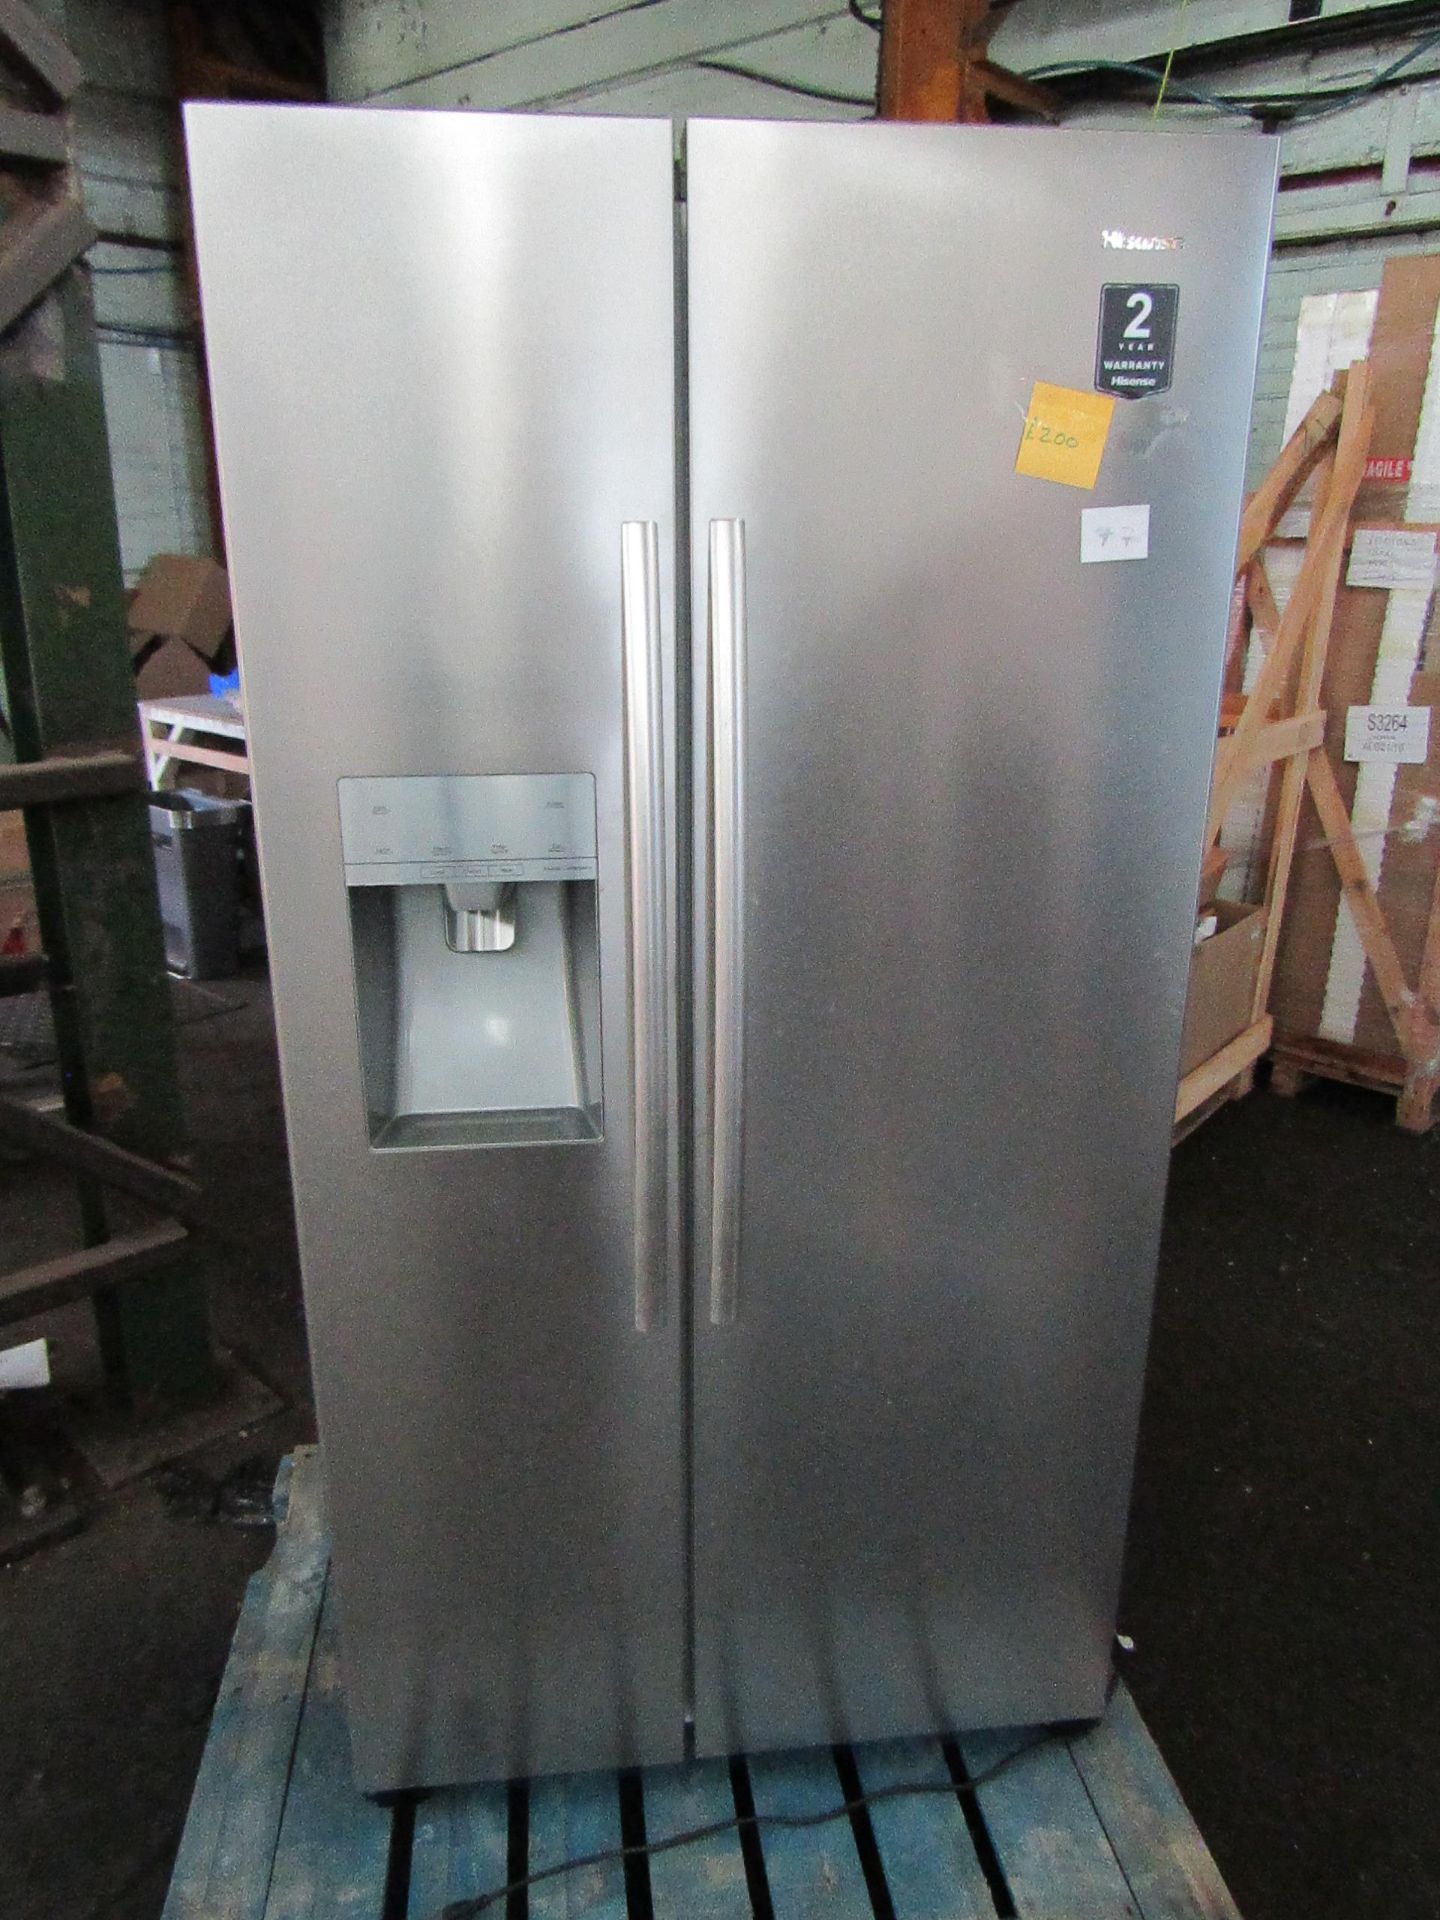 Hisense RS694N4 Amerivcan fridge freezer with water and Ice dispenser, Tested and working for